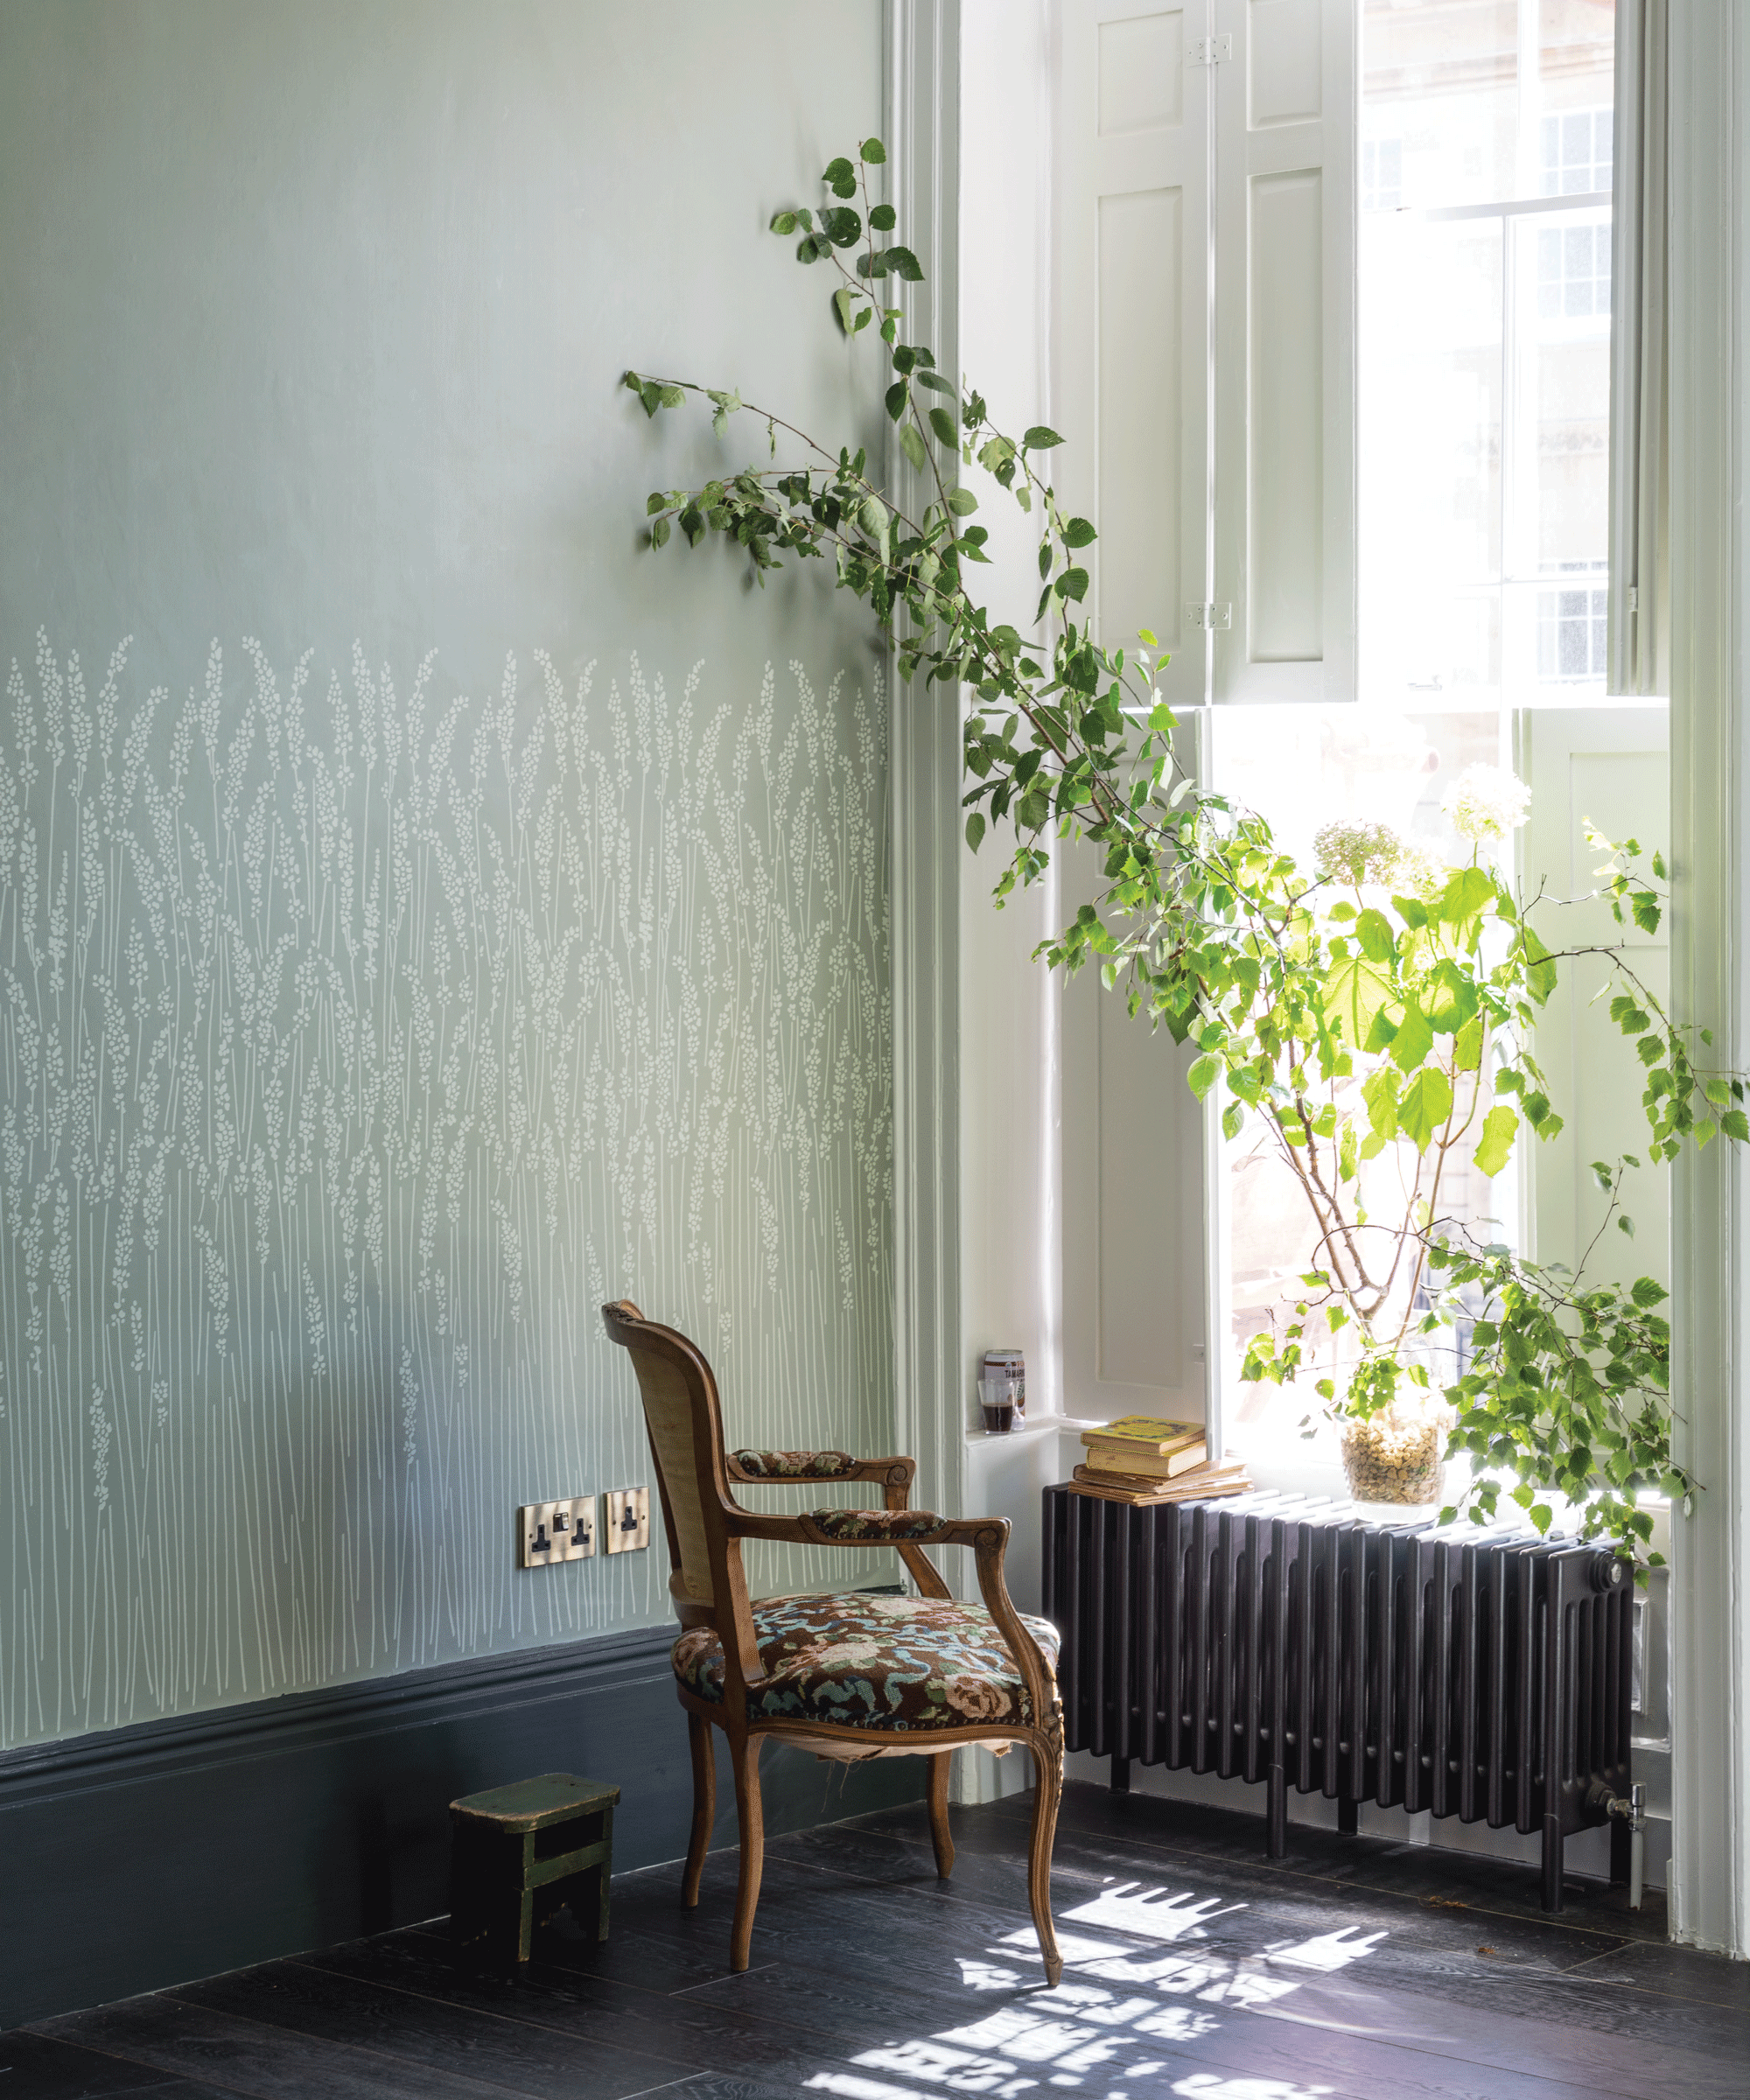 Room with blue patterned wall paper and large house plant